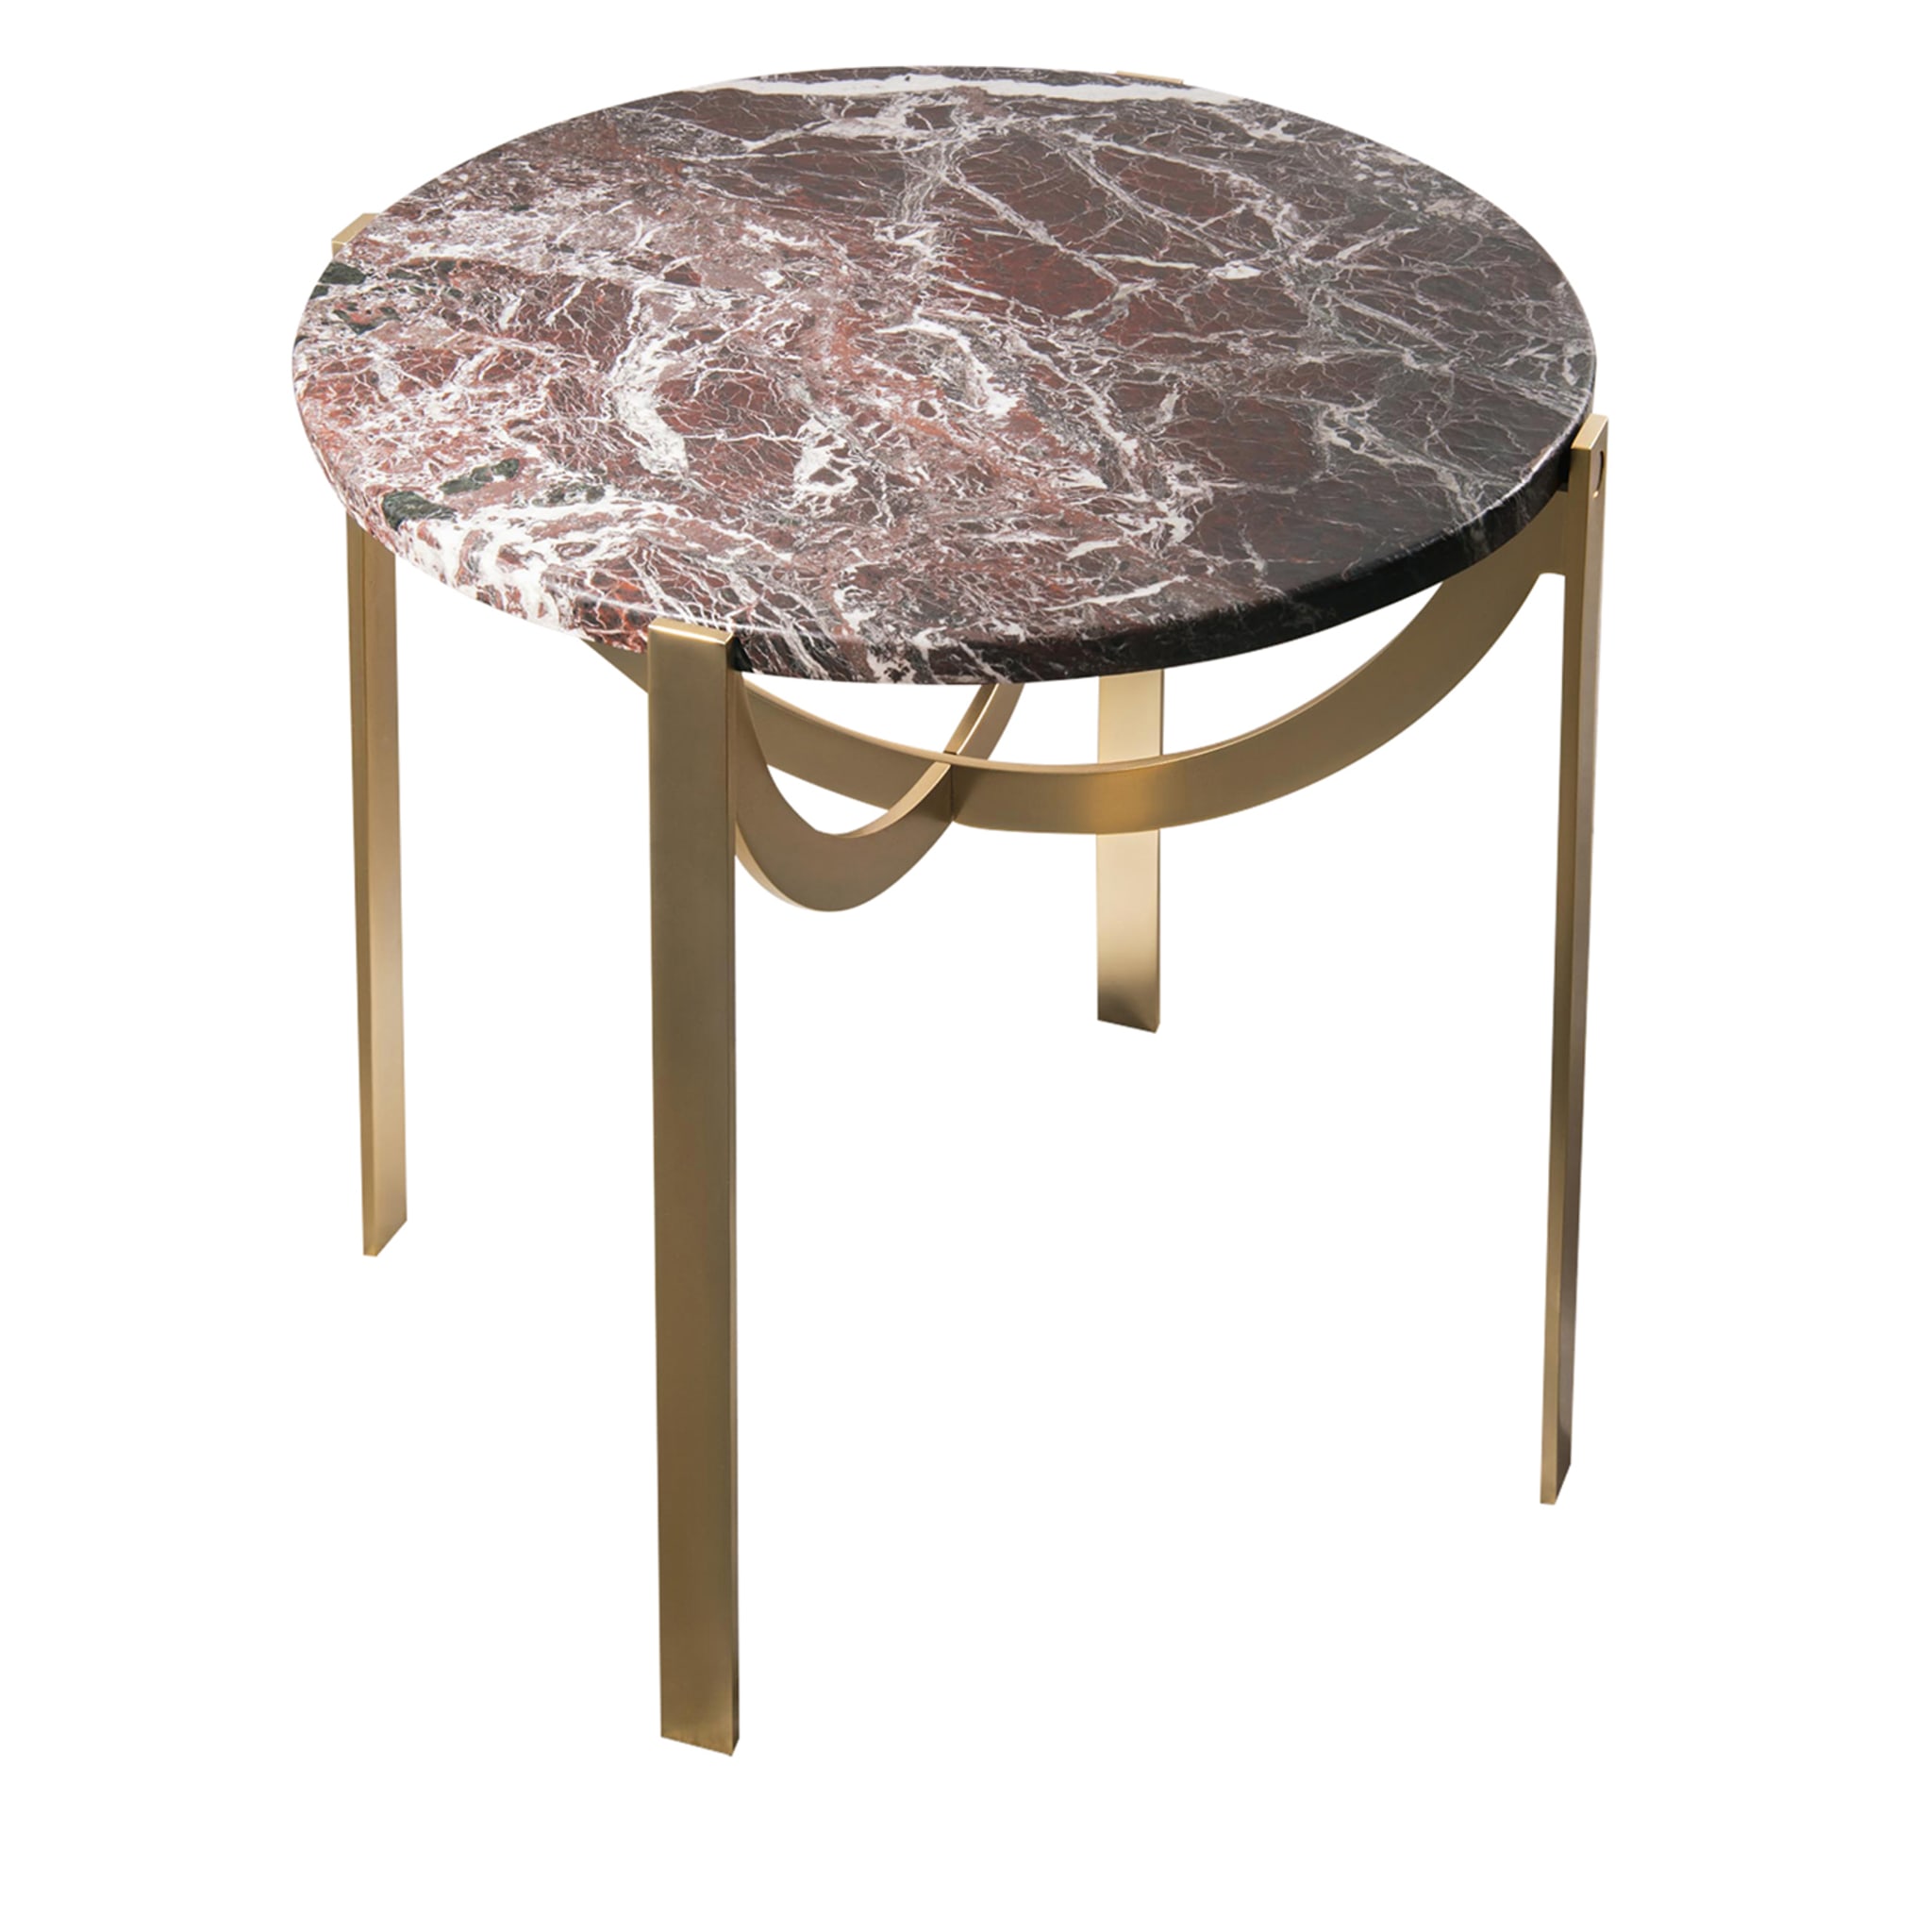 Astra Side Table by Patrick Norguet - Main view